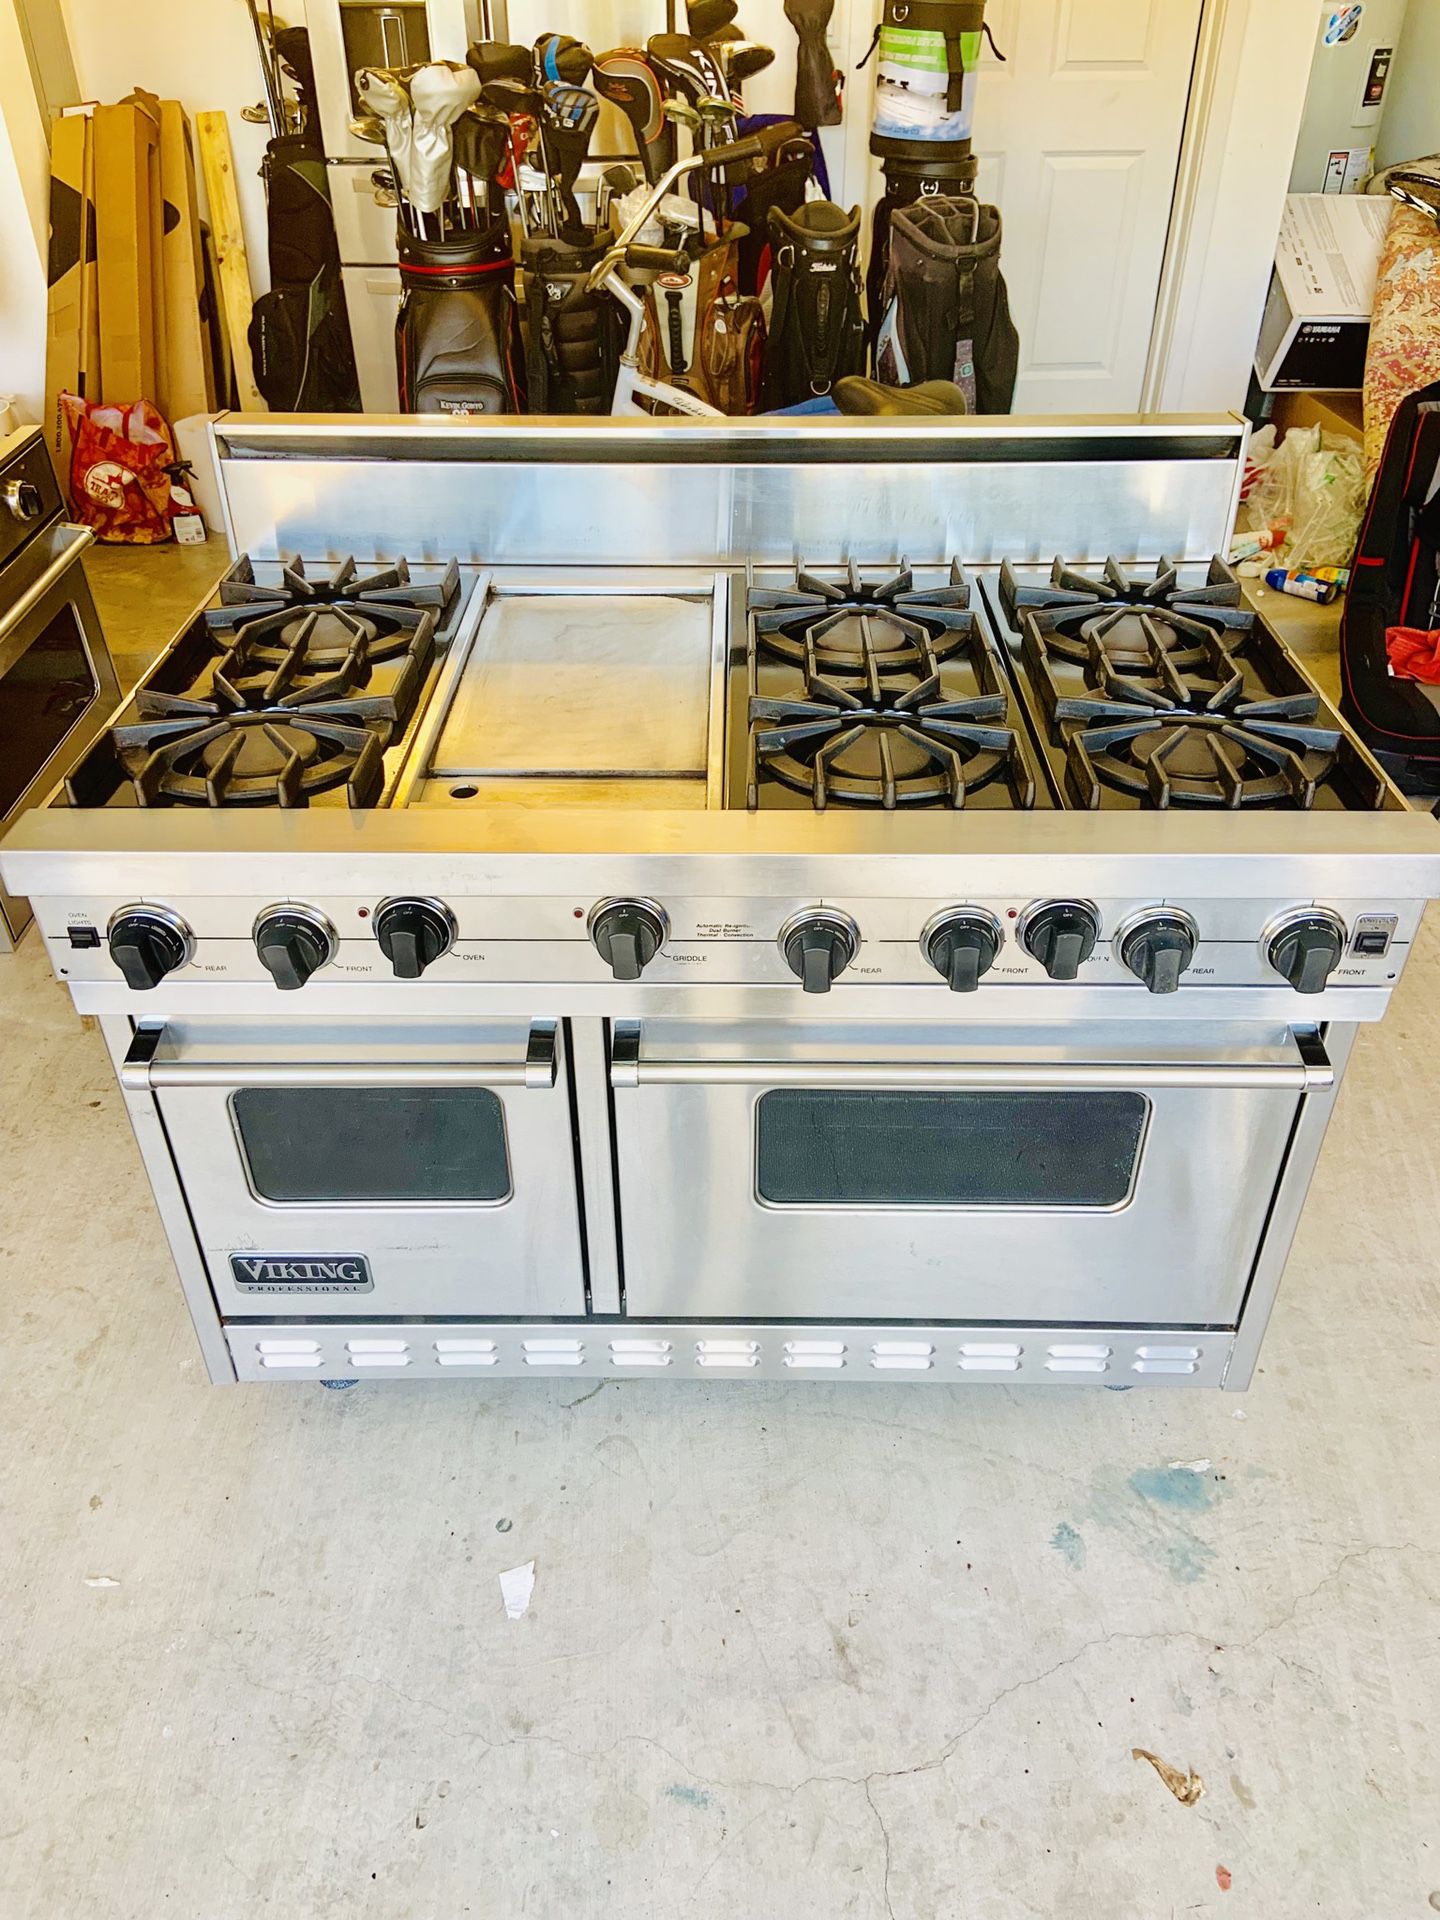 MINT CONDITION VIKING 48" GAS RANGE STOVE 5 YEARS OLD 6 BURNER